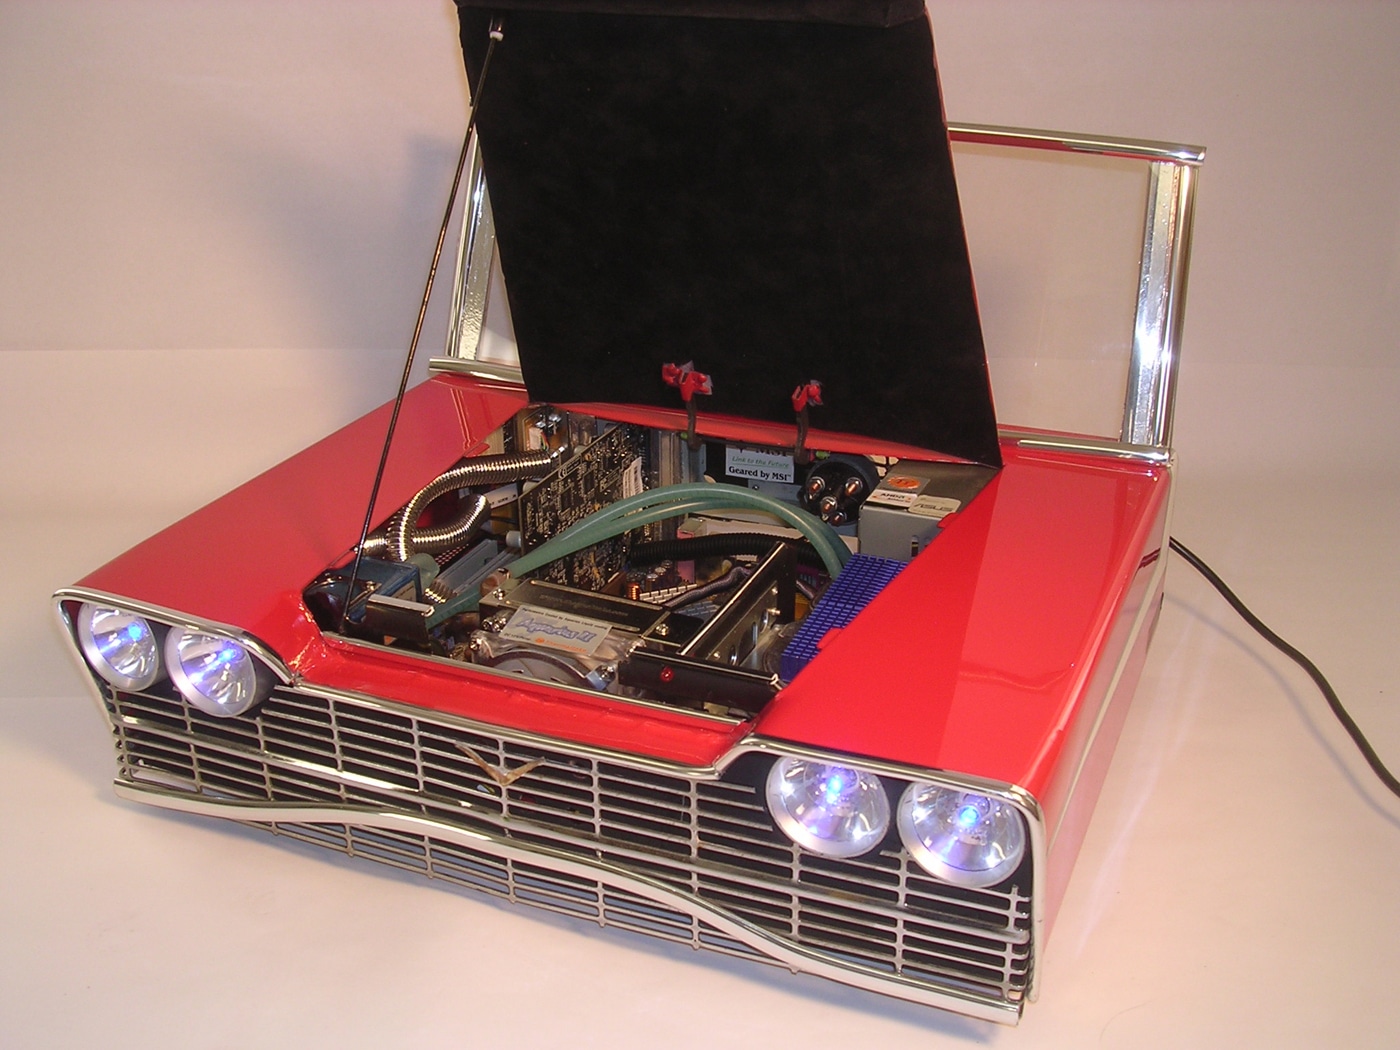 Retro Hotrod PC Case Inspired By The Christine Car From The 1983 Movie